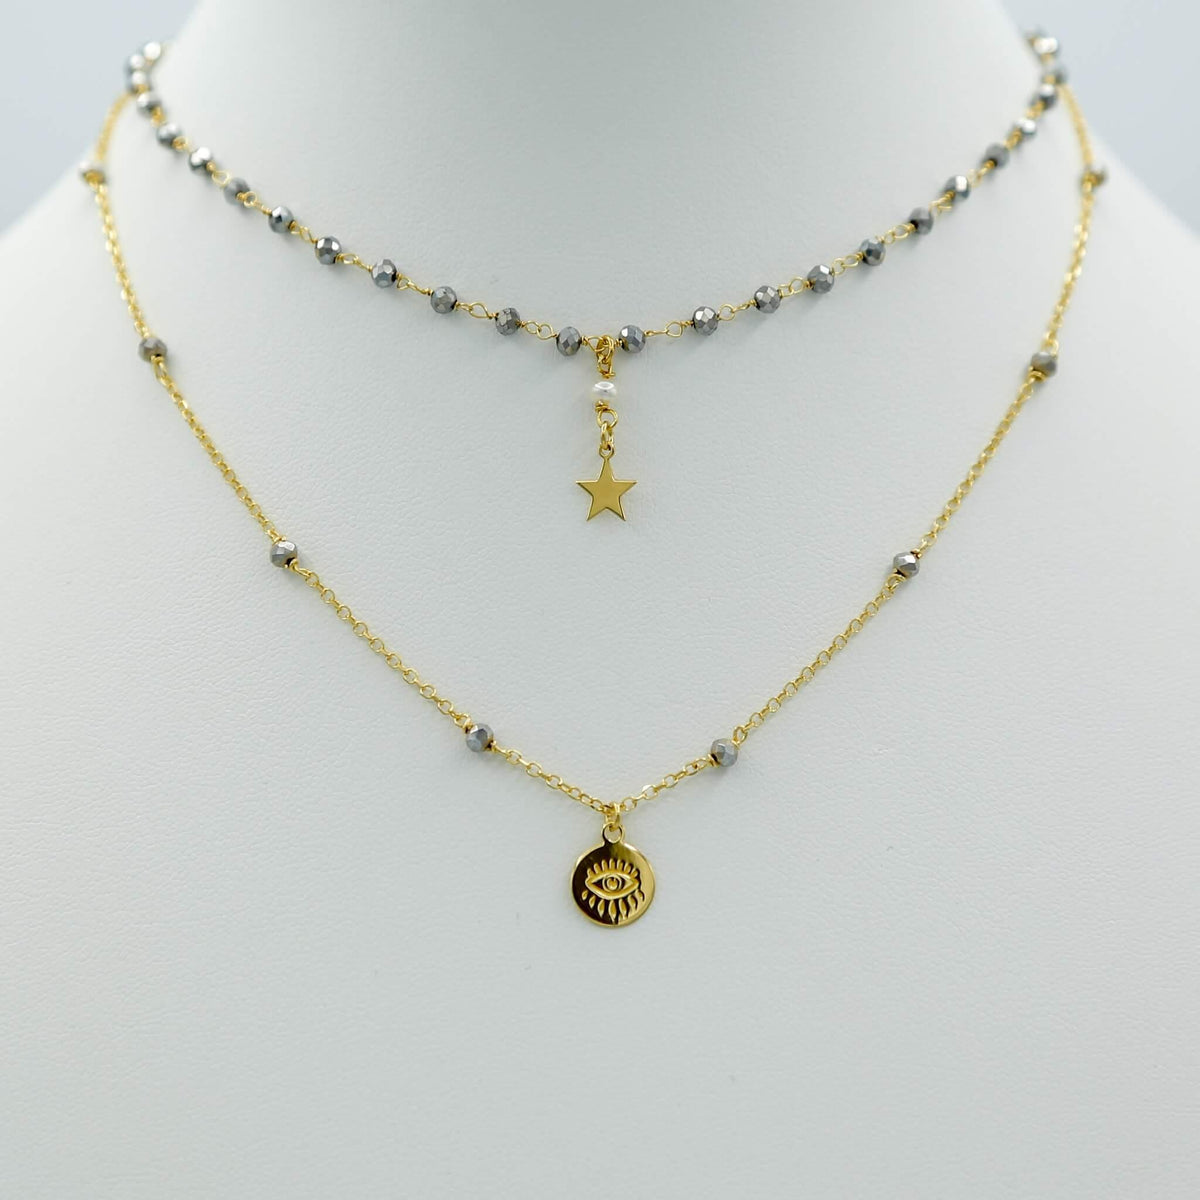 Gold Choker Necklace with Silver Beads Star Pendant - Vita Isola